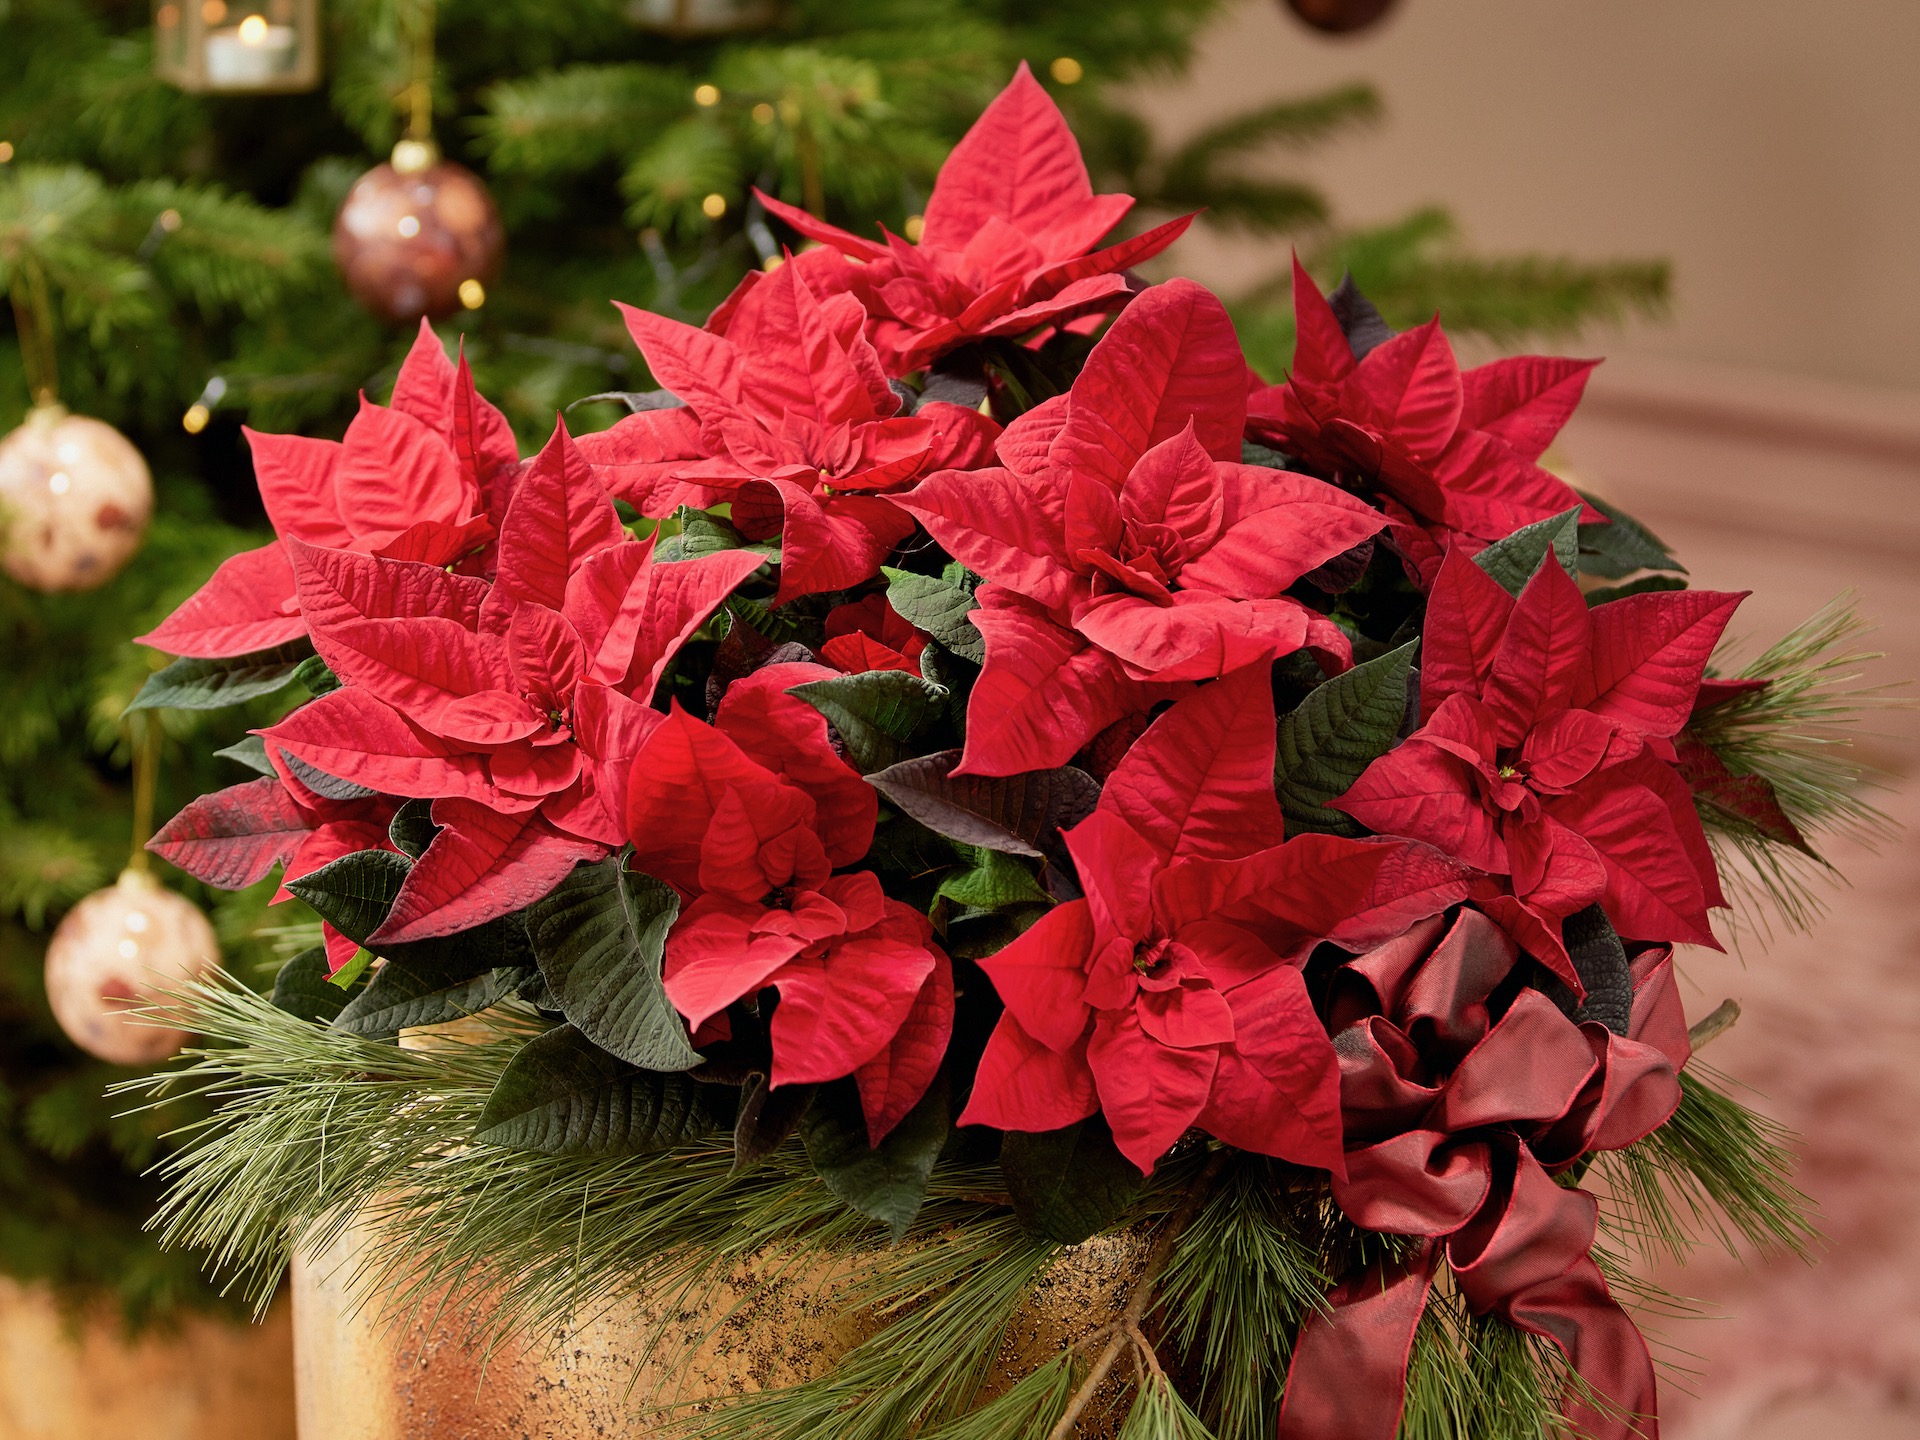 Red poinsettia in gold pot in front of Christmas tree